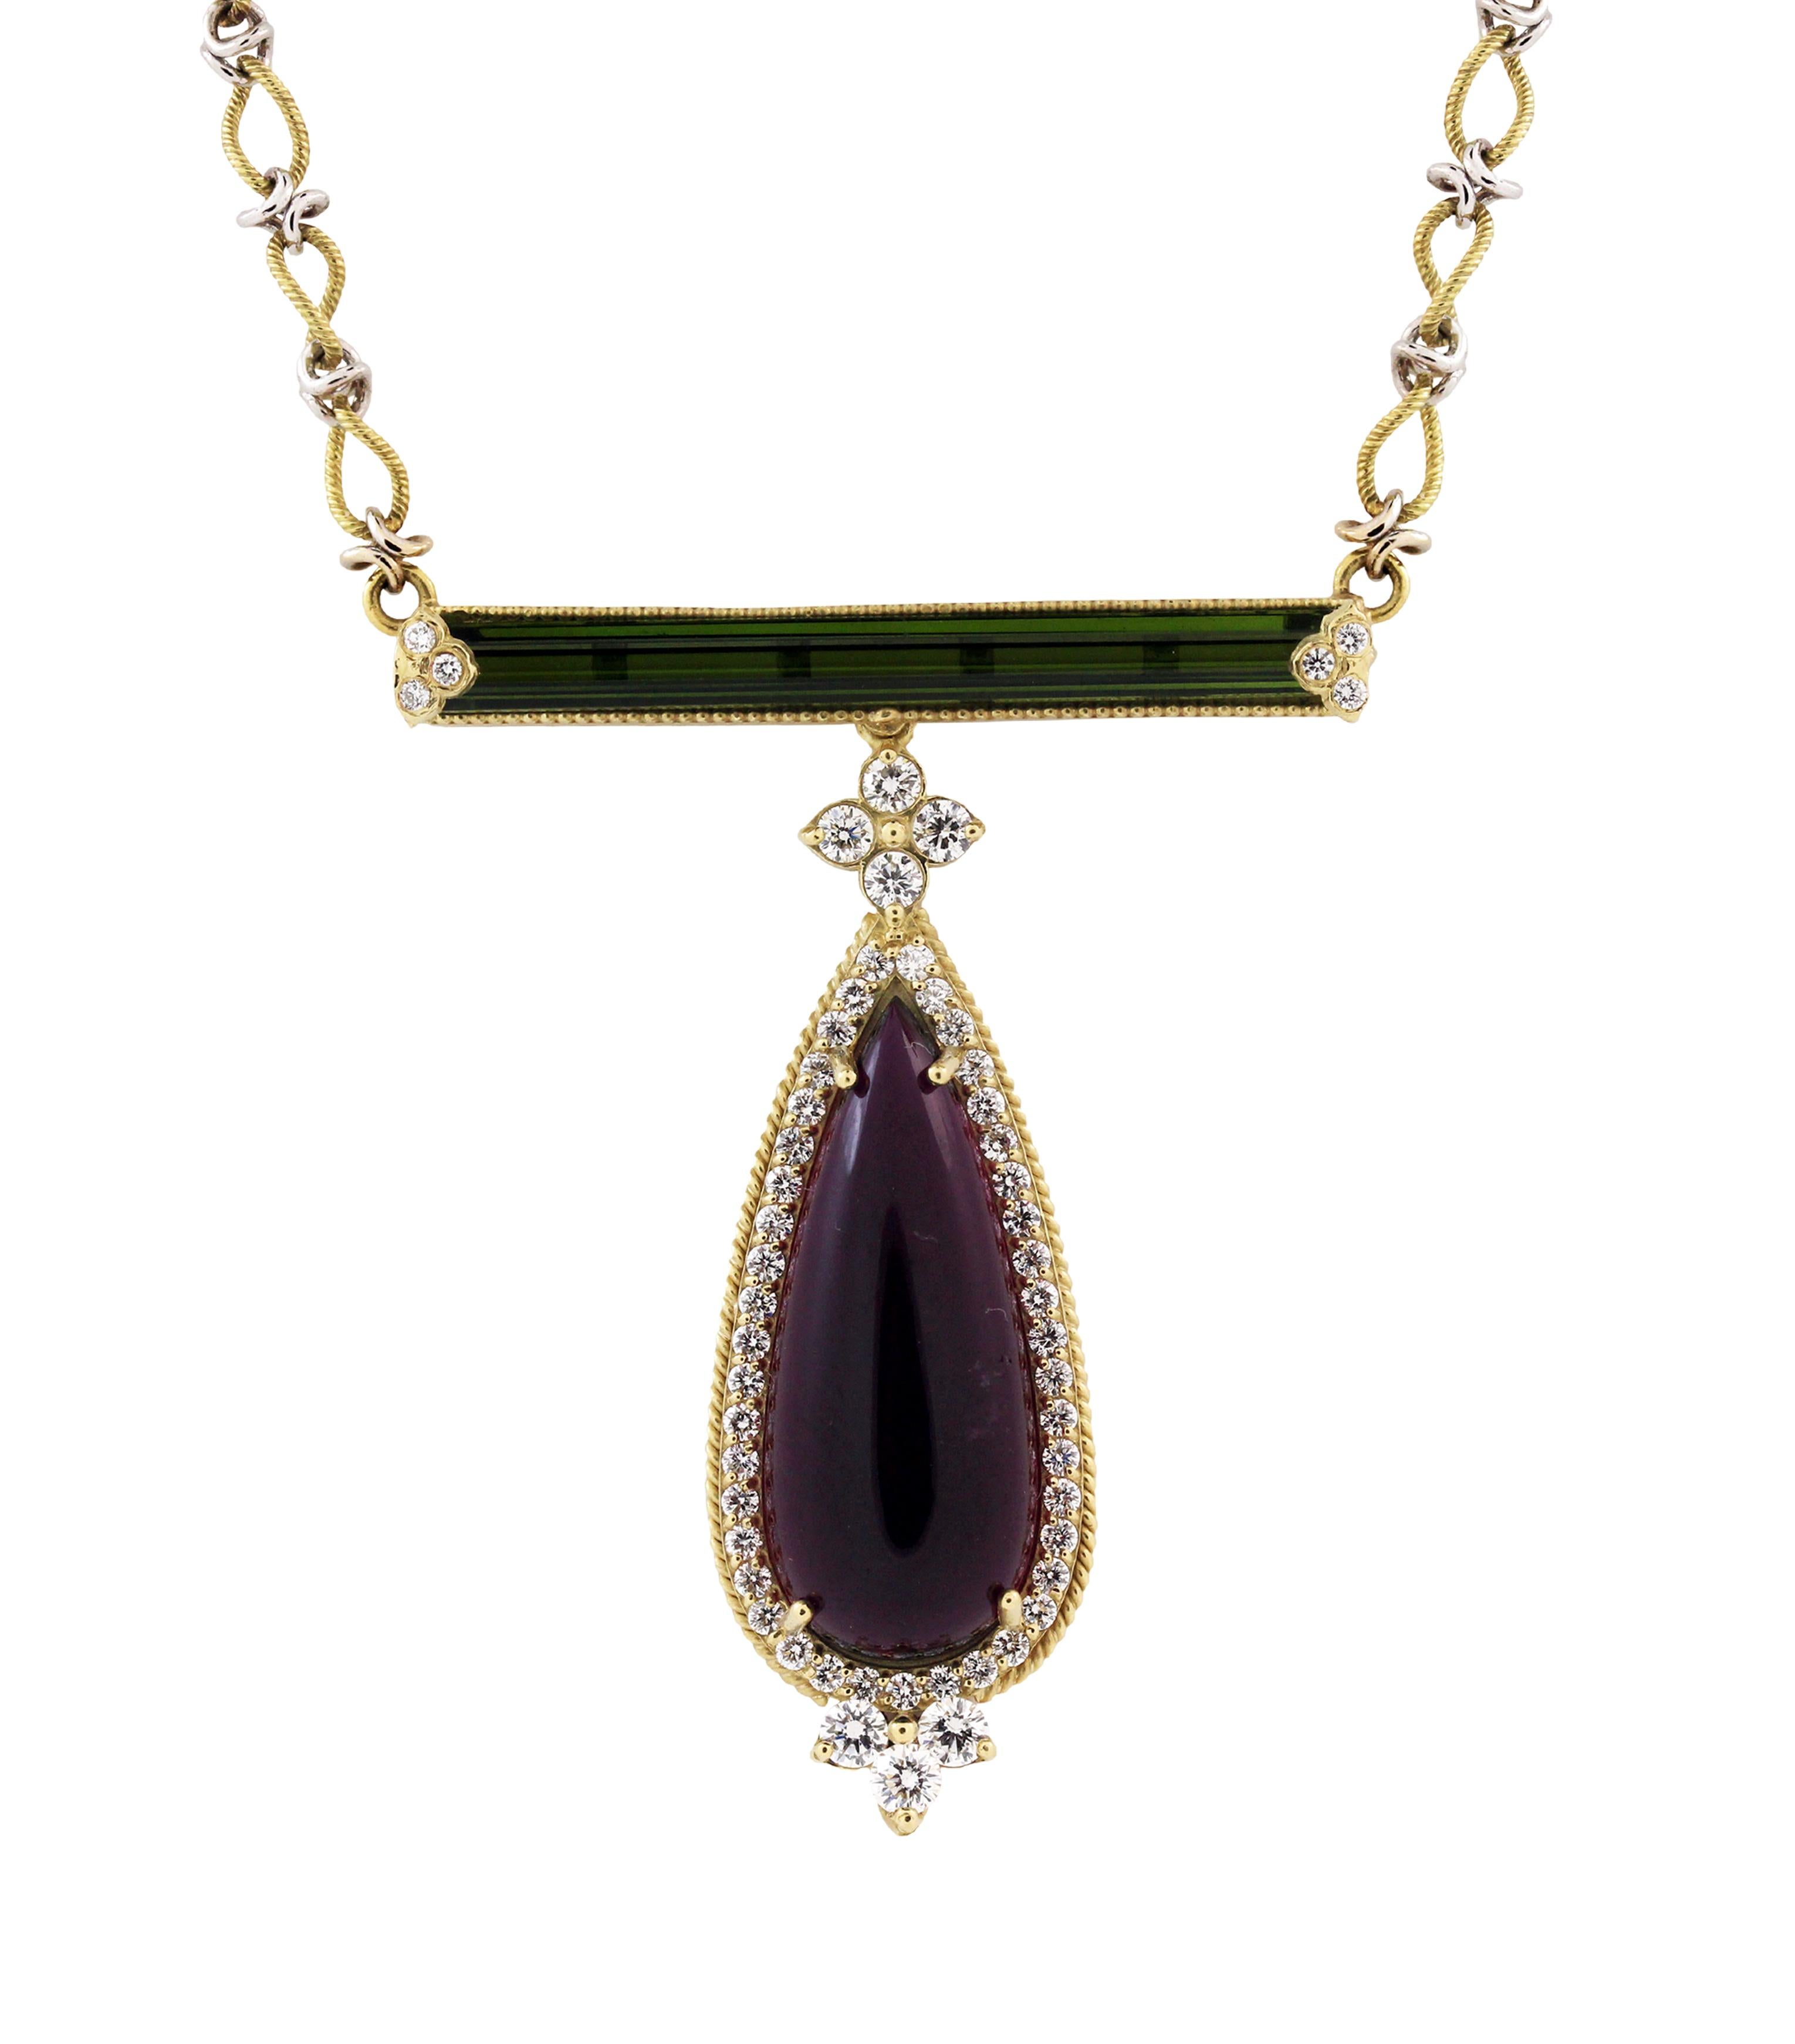 IF YOU ARE REALLY INTERESTED, CONTACT US WITH ANY REASONABLE OFFER. WE WILL TRY OUR BEST TO MAKE YOU HAPPY!

18K Two-Tone Gold Necklace with Rubelite and Green Tourmaline Pendant 

3.59 carat Rectangular Green Tourmaline 
13.40 carat Cabochon